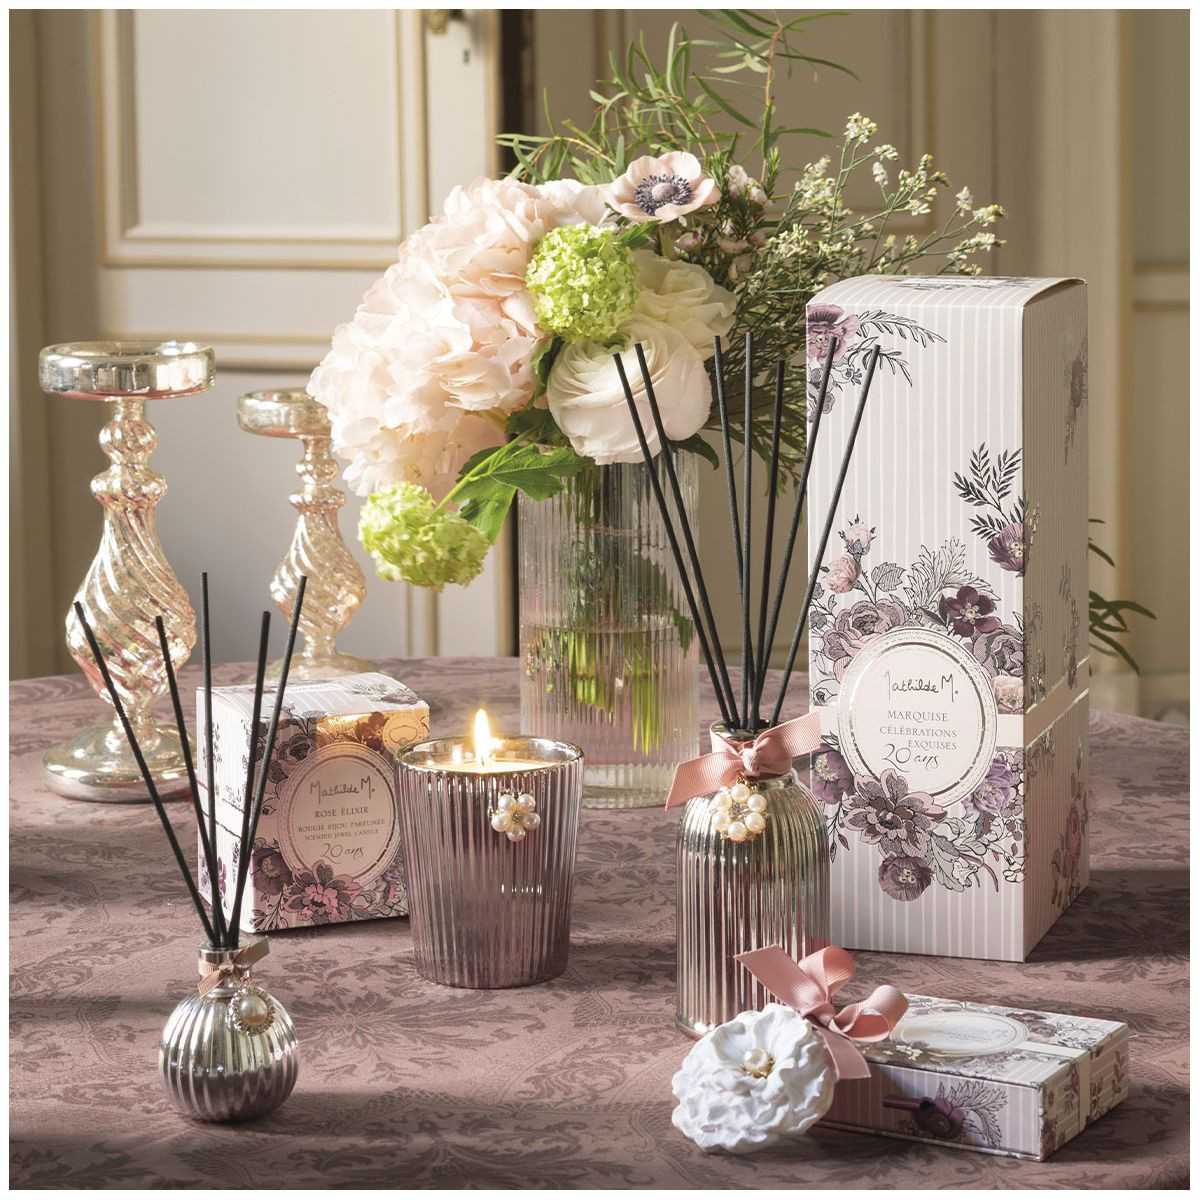 Category Candle + diffuser - INTERIEUR DECORATION :